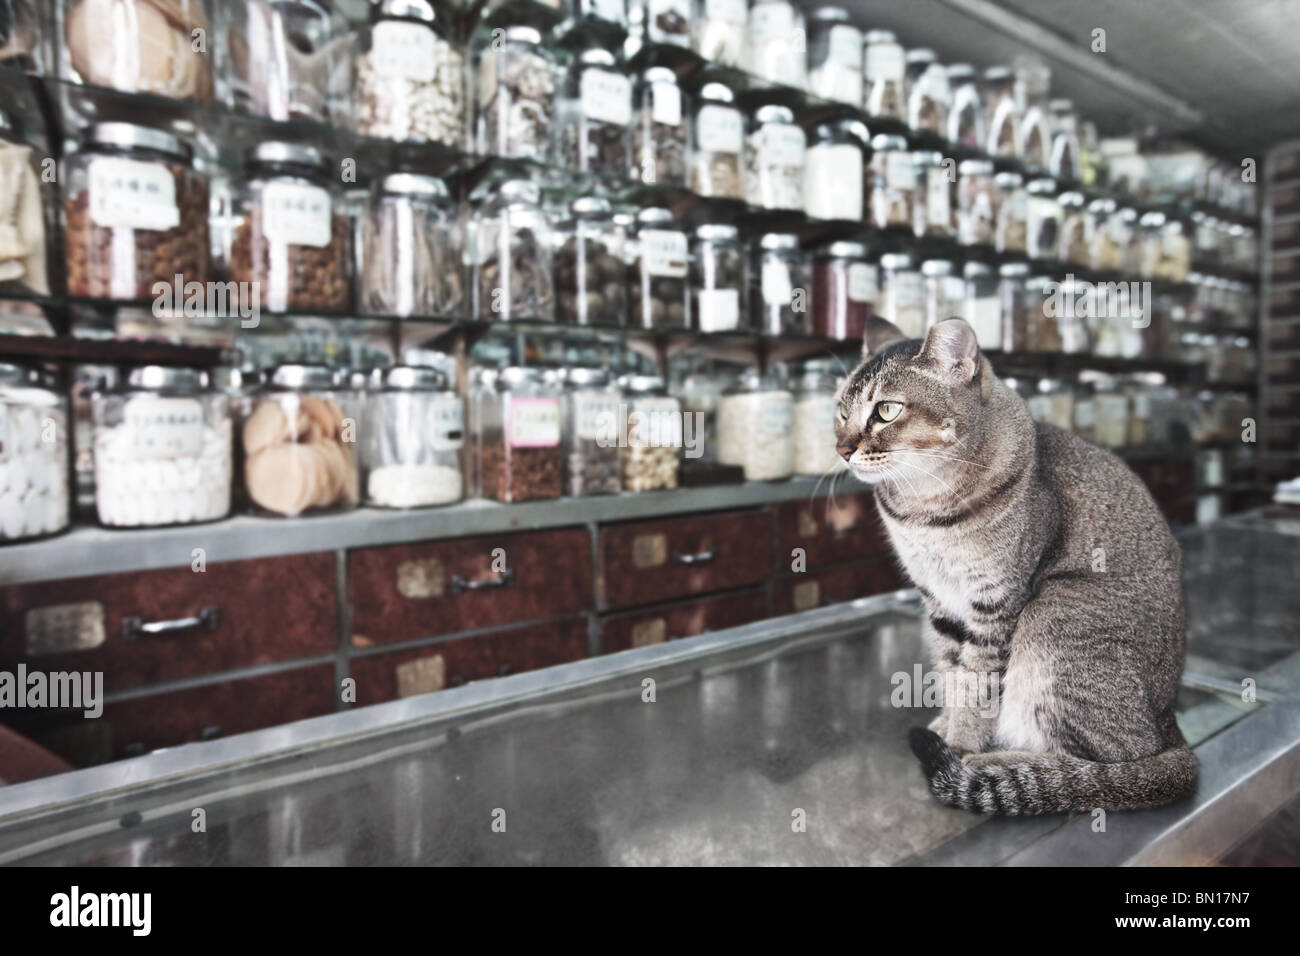 Cat like a seller in traditional Chinese medicine and dried goods shop Stock Photo